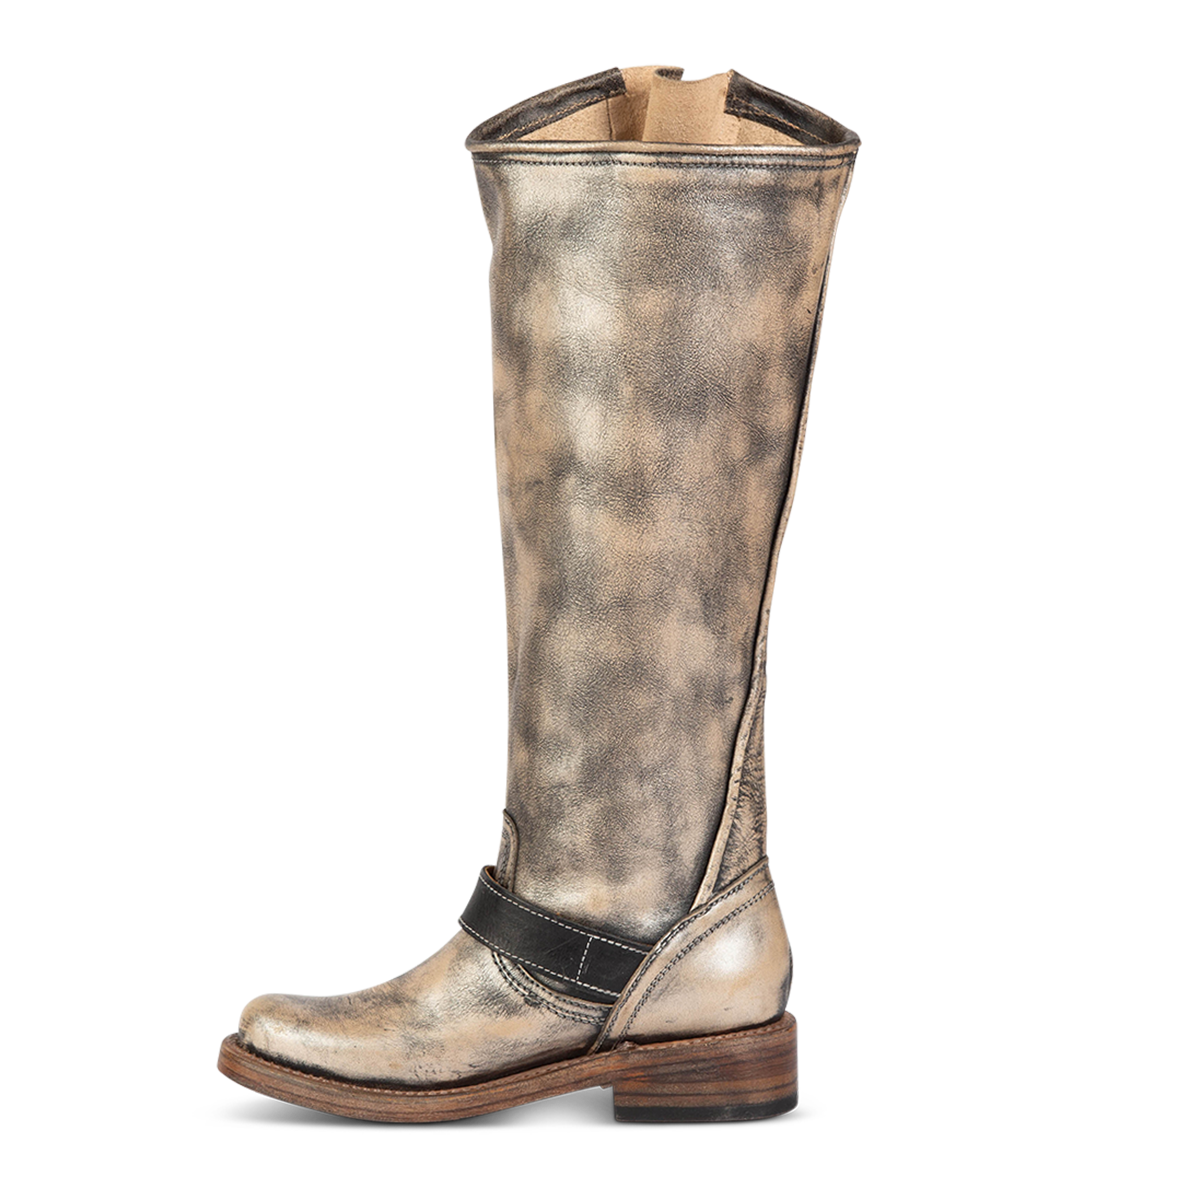 Inside view showing full-grain leather and low heel on FREEBIRD women's Contra pewter boot